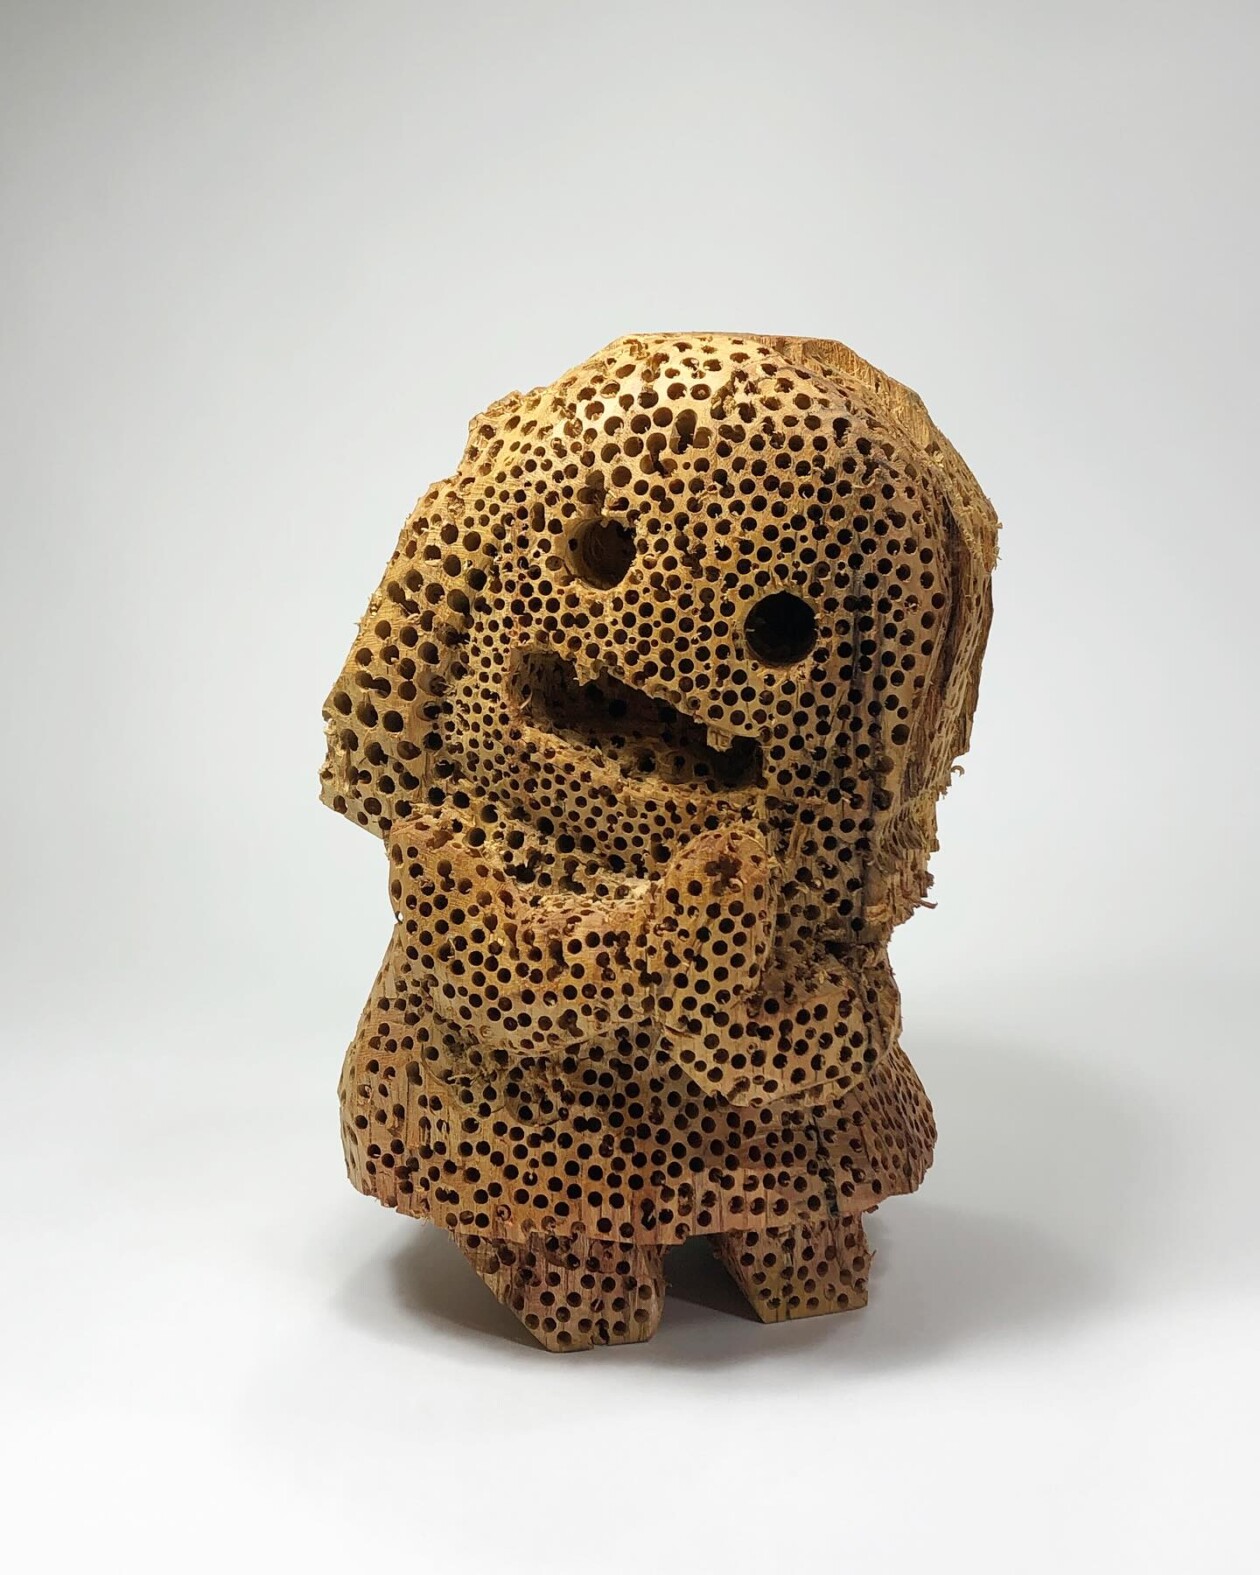 The Enchanting World Of Hirosuke Yabe's Wooden Beings (15)